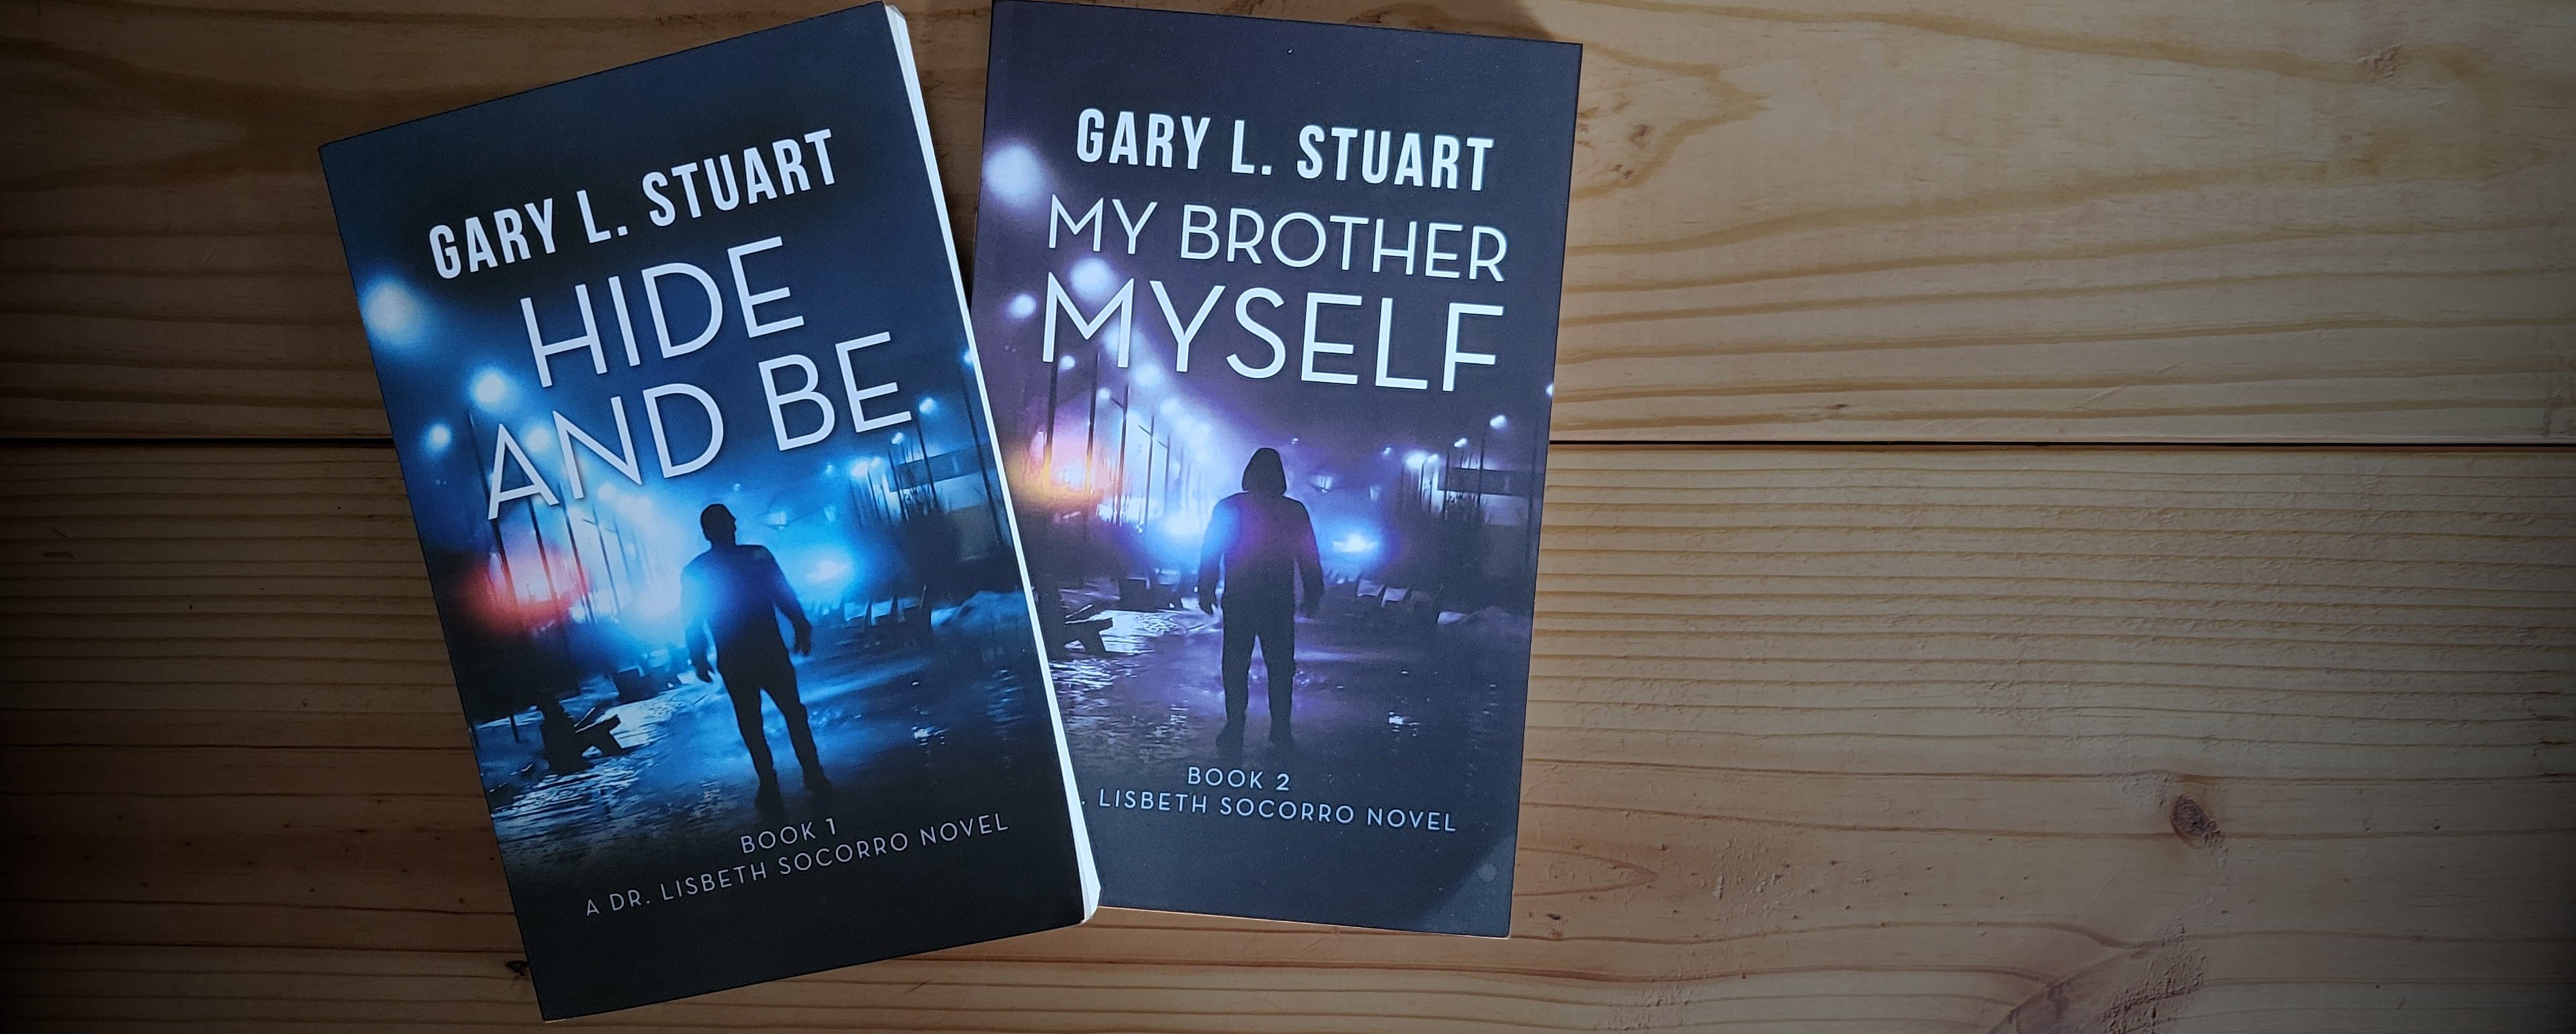 Book Cover of My Brother Myself by Gary L. Stuart